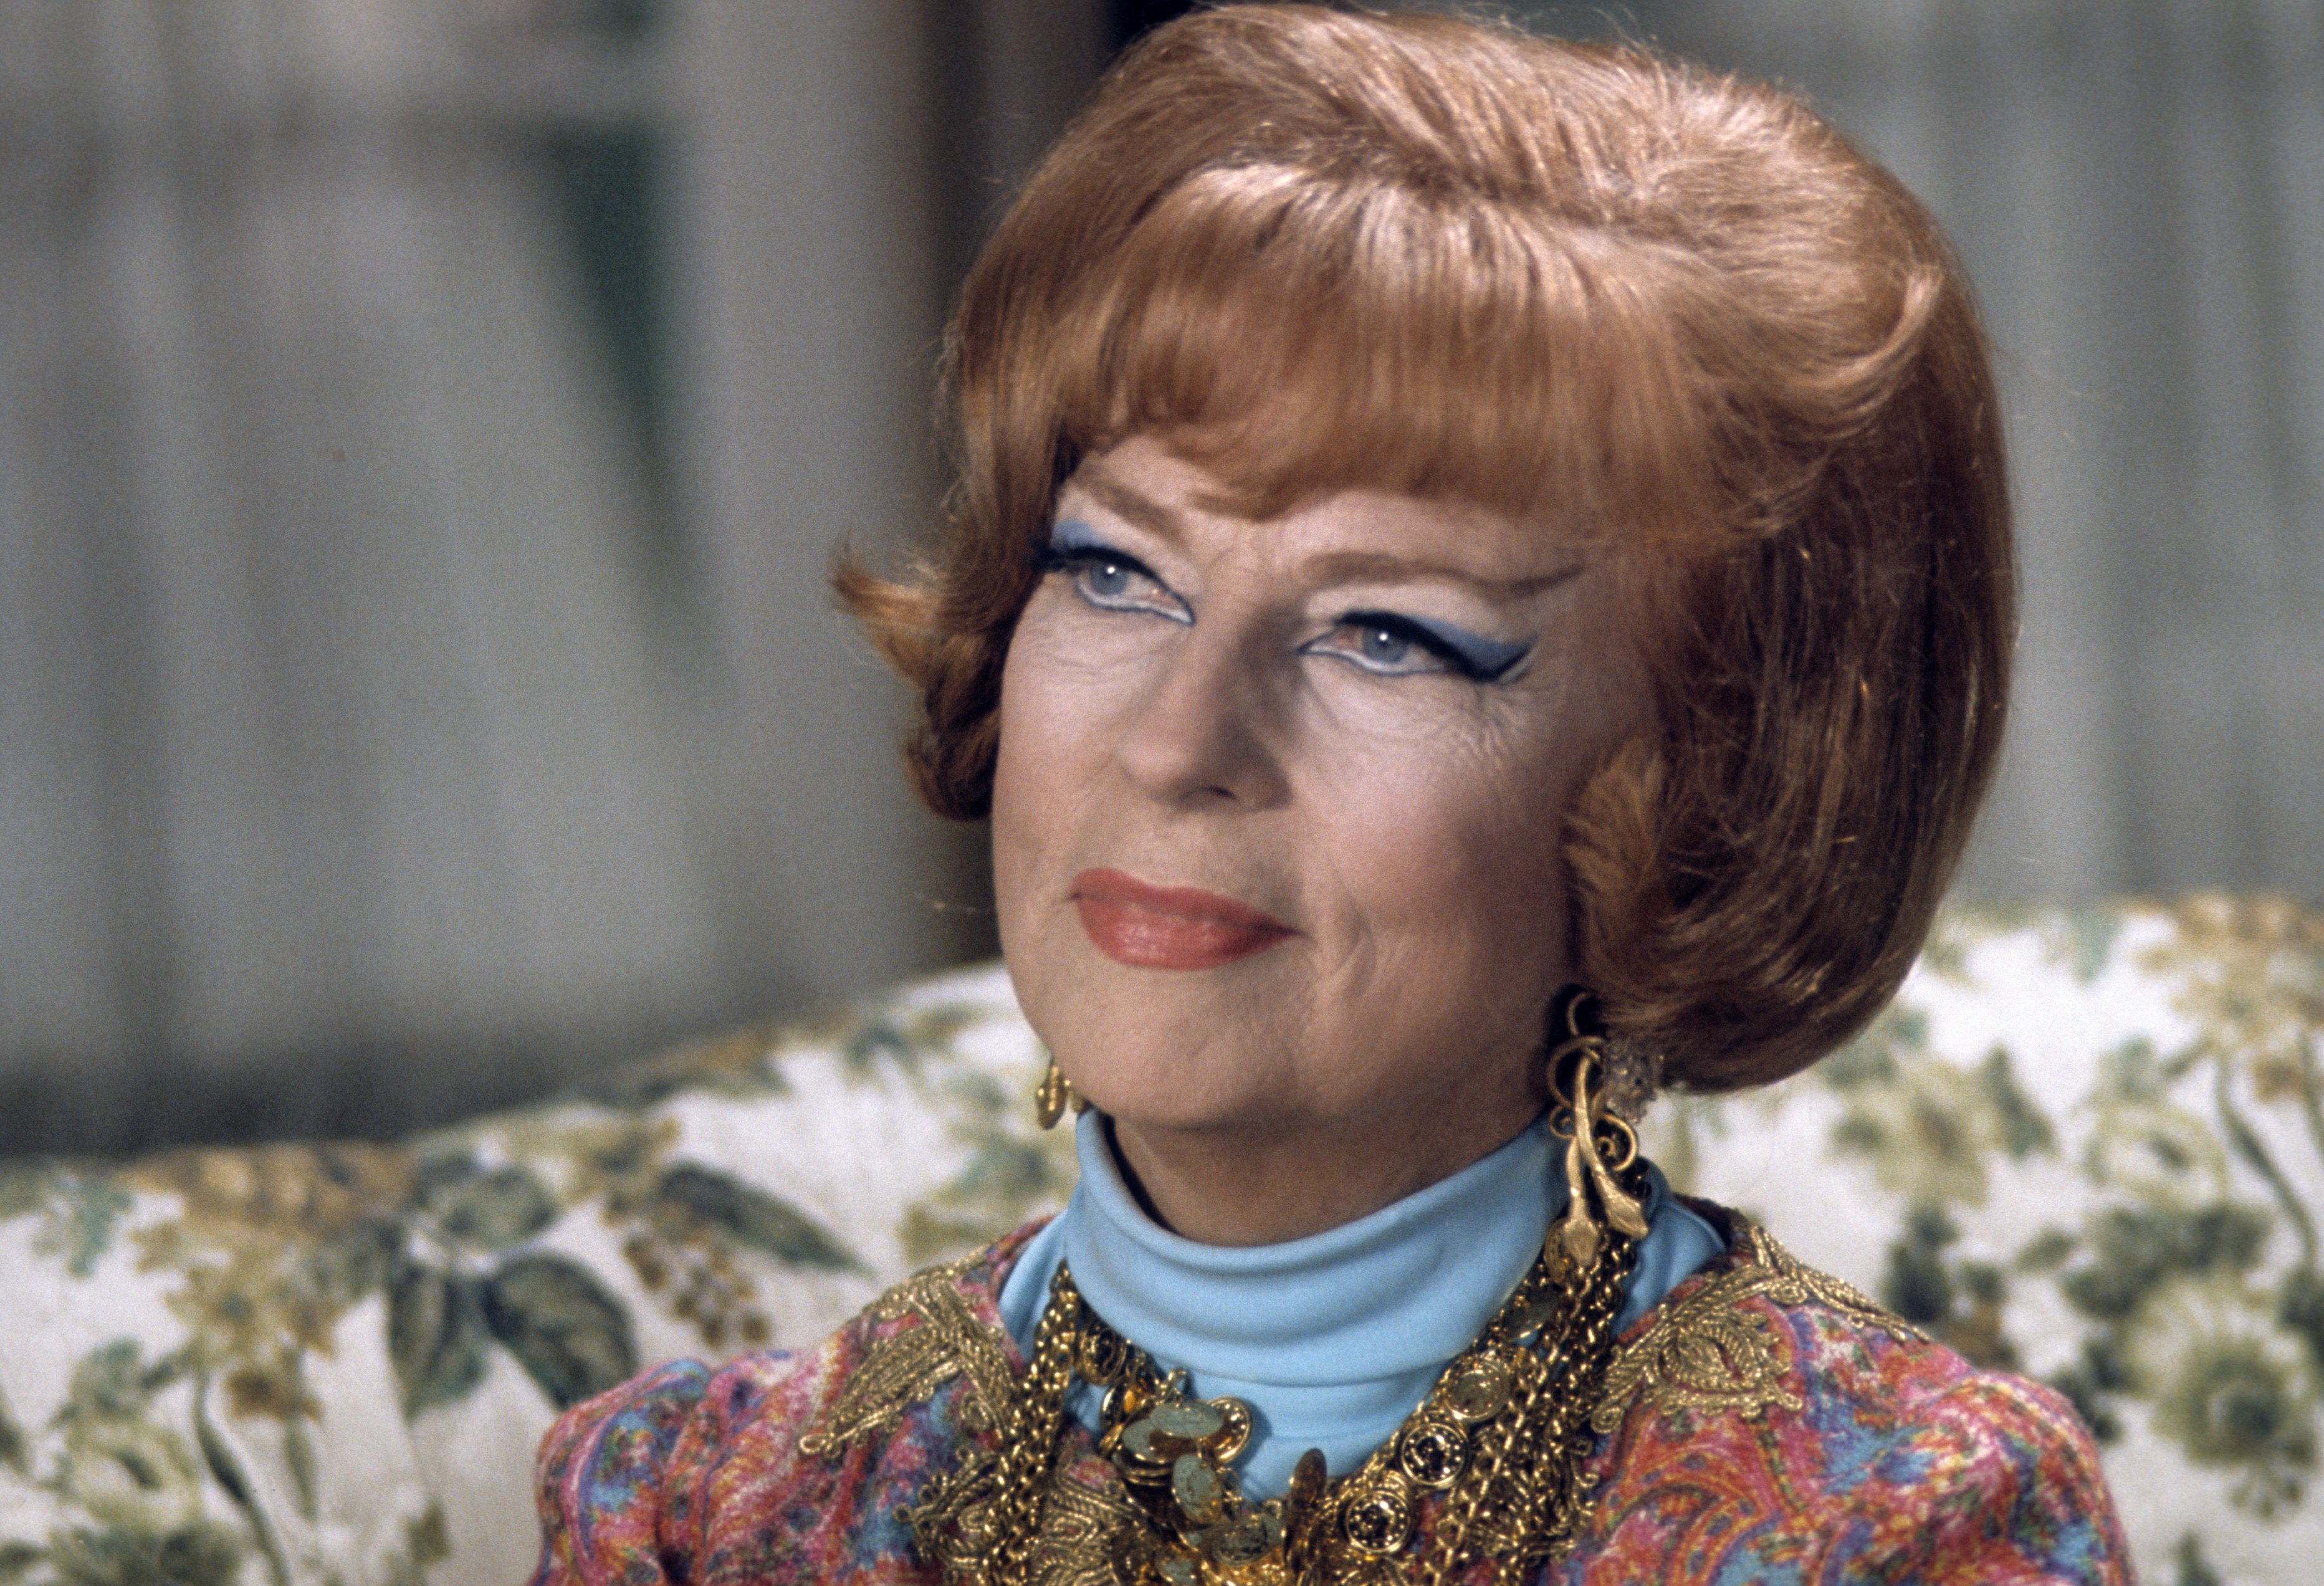 Agnes Moorehead as Endora "Bewitched" on the episode titled "Samantha's Better Halves" aired on 1 January, 1970 | Photo: Getty Images